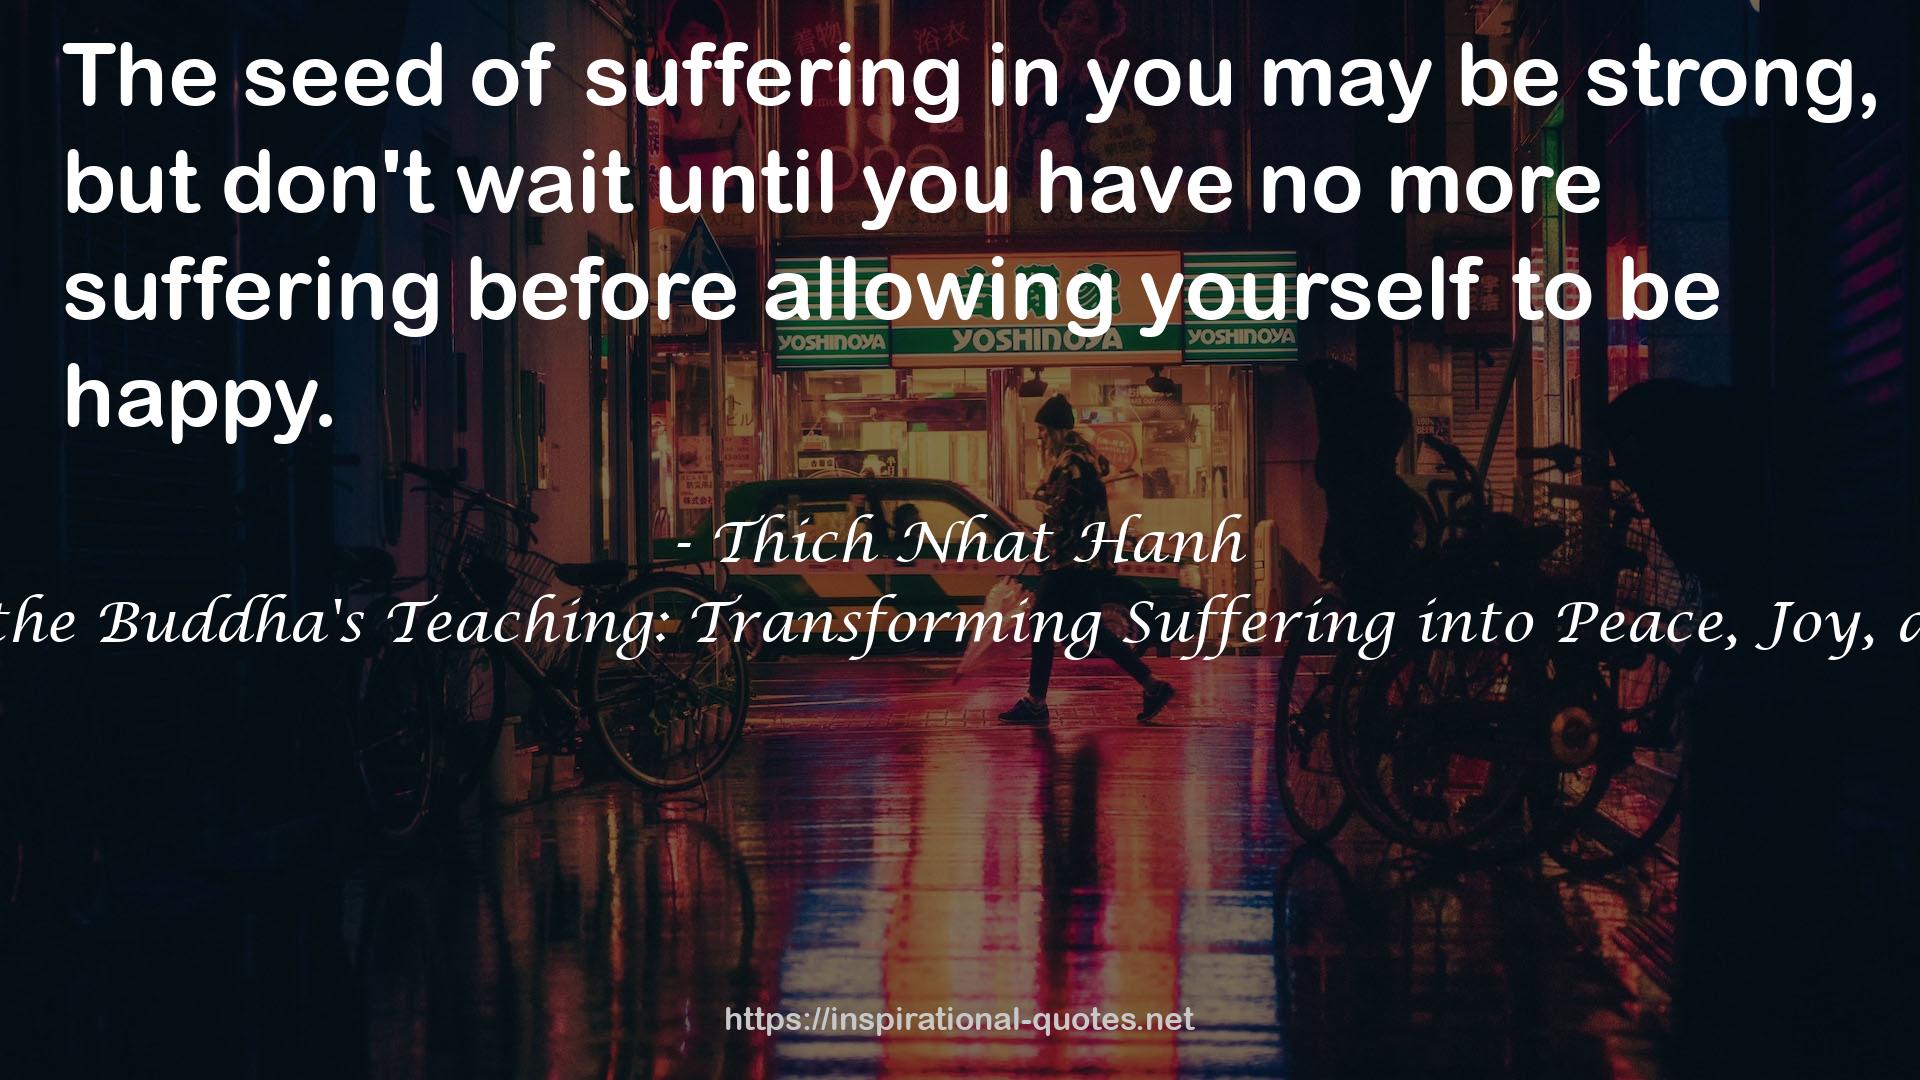 The Heart of the Buddha's Teaching: Transforming Suffering into Peace, Joy, and Liberation QUOTES